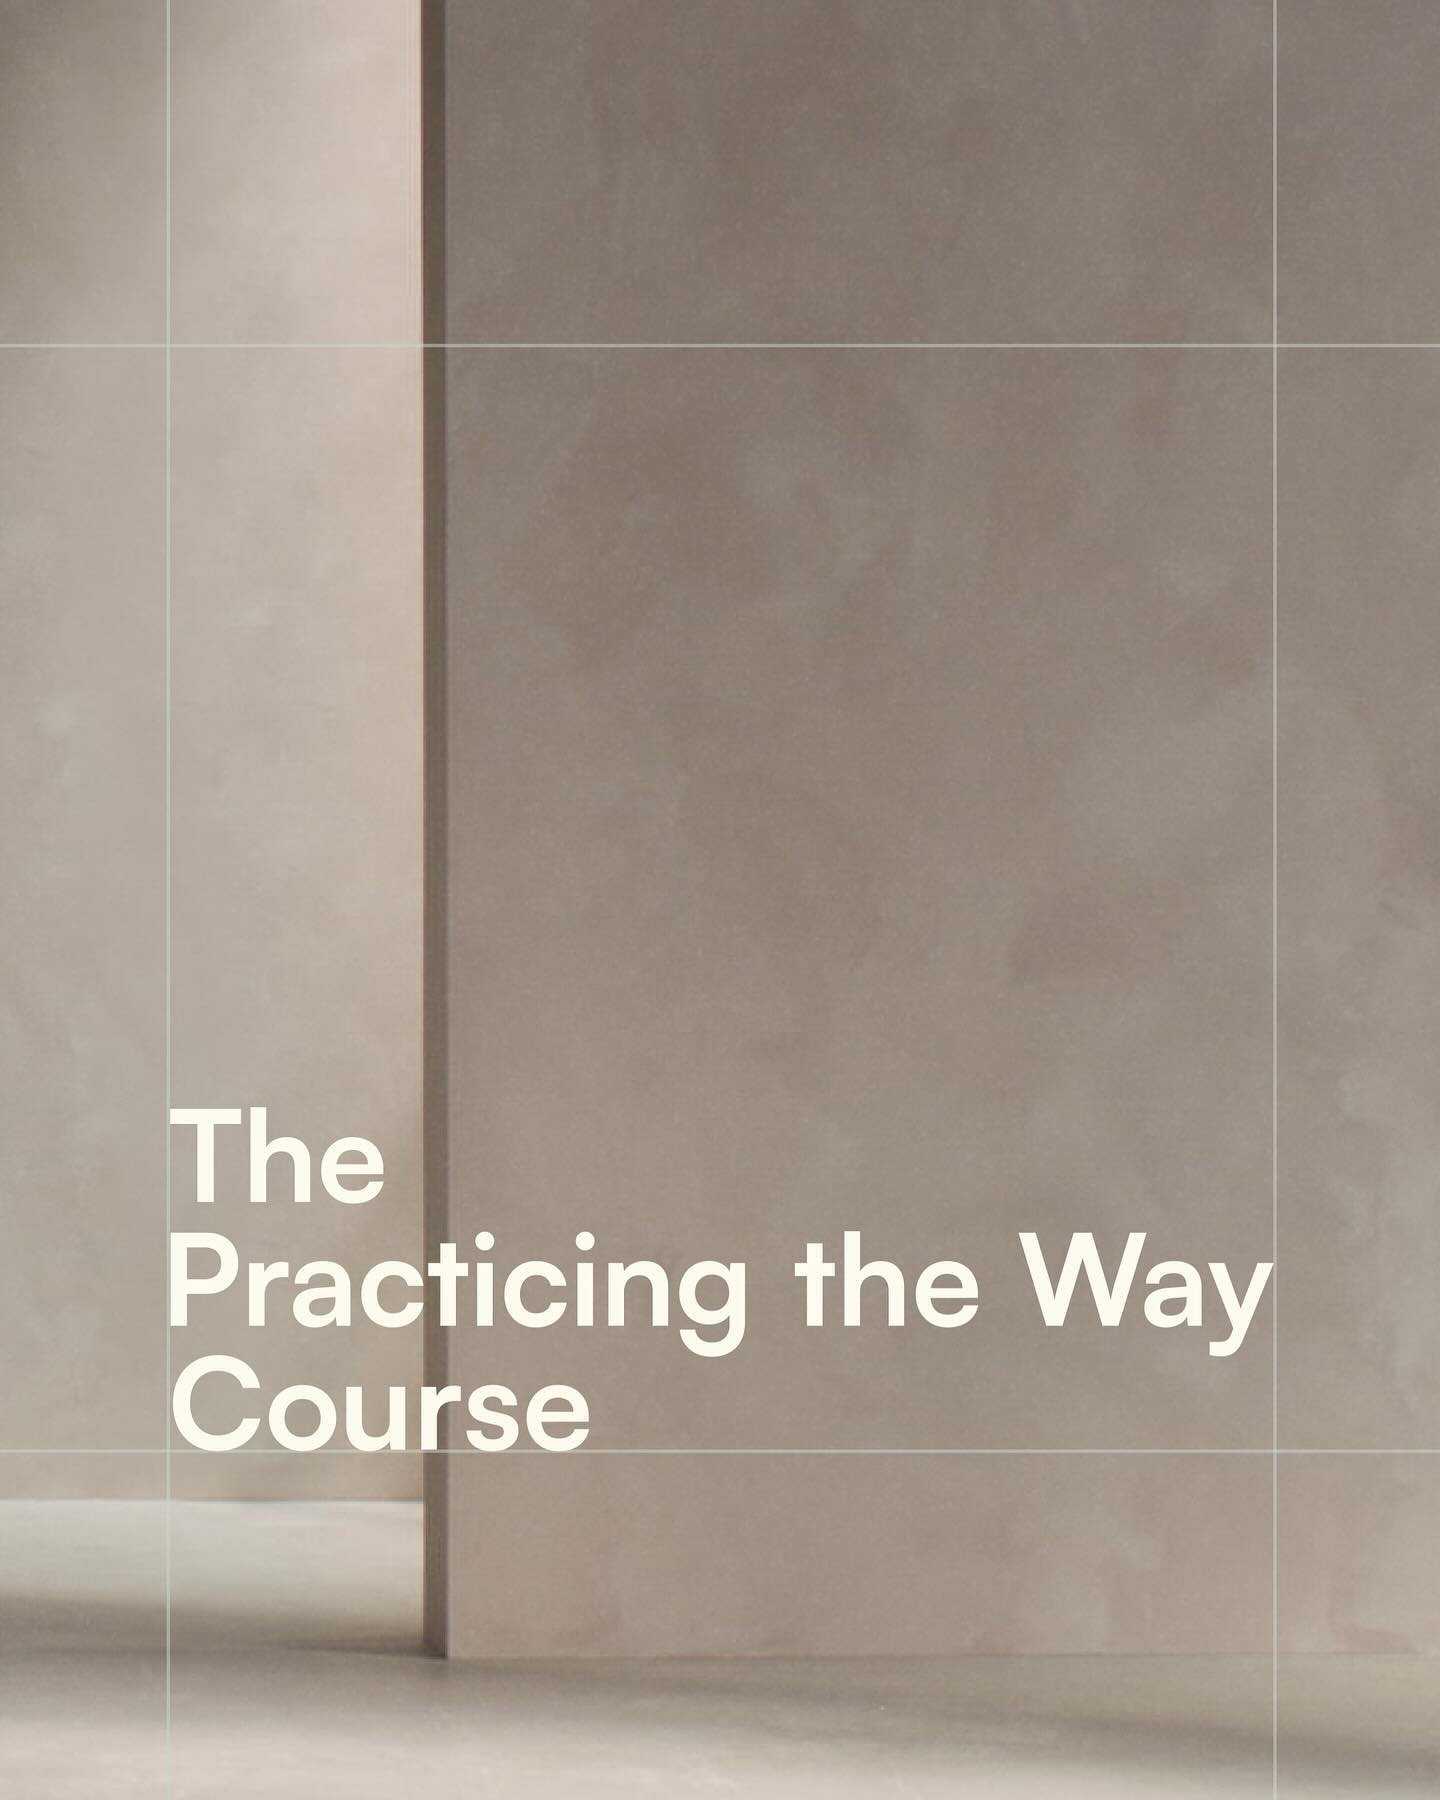 This week we released the Practicing the Way course, our new flagship offering. I&rsquo;ve spent the last year of my life on this, and we are praying it is one of our most helpful contributions.

The course is designed to be run in community, with yo